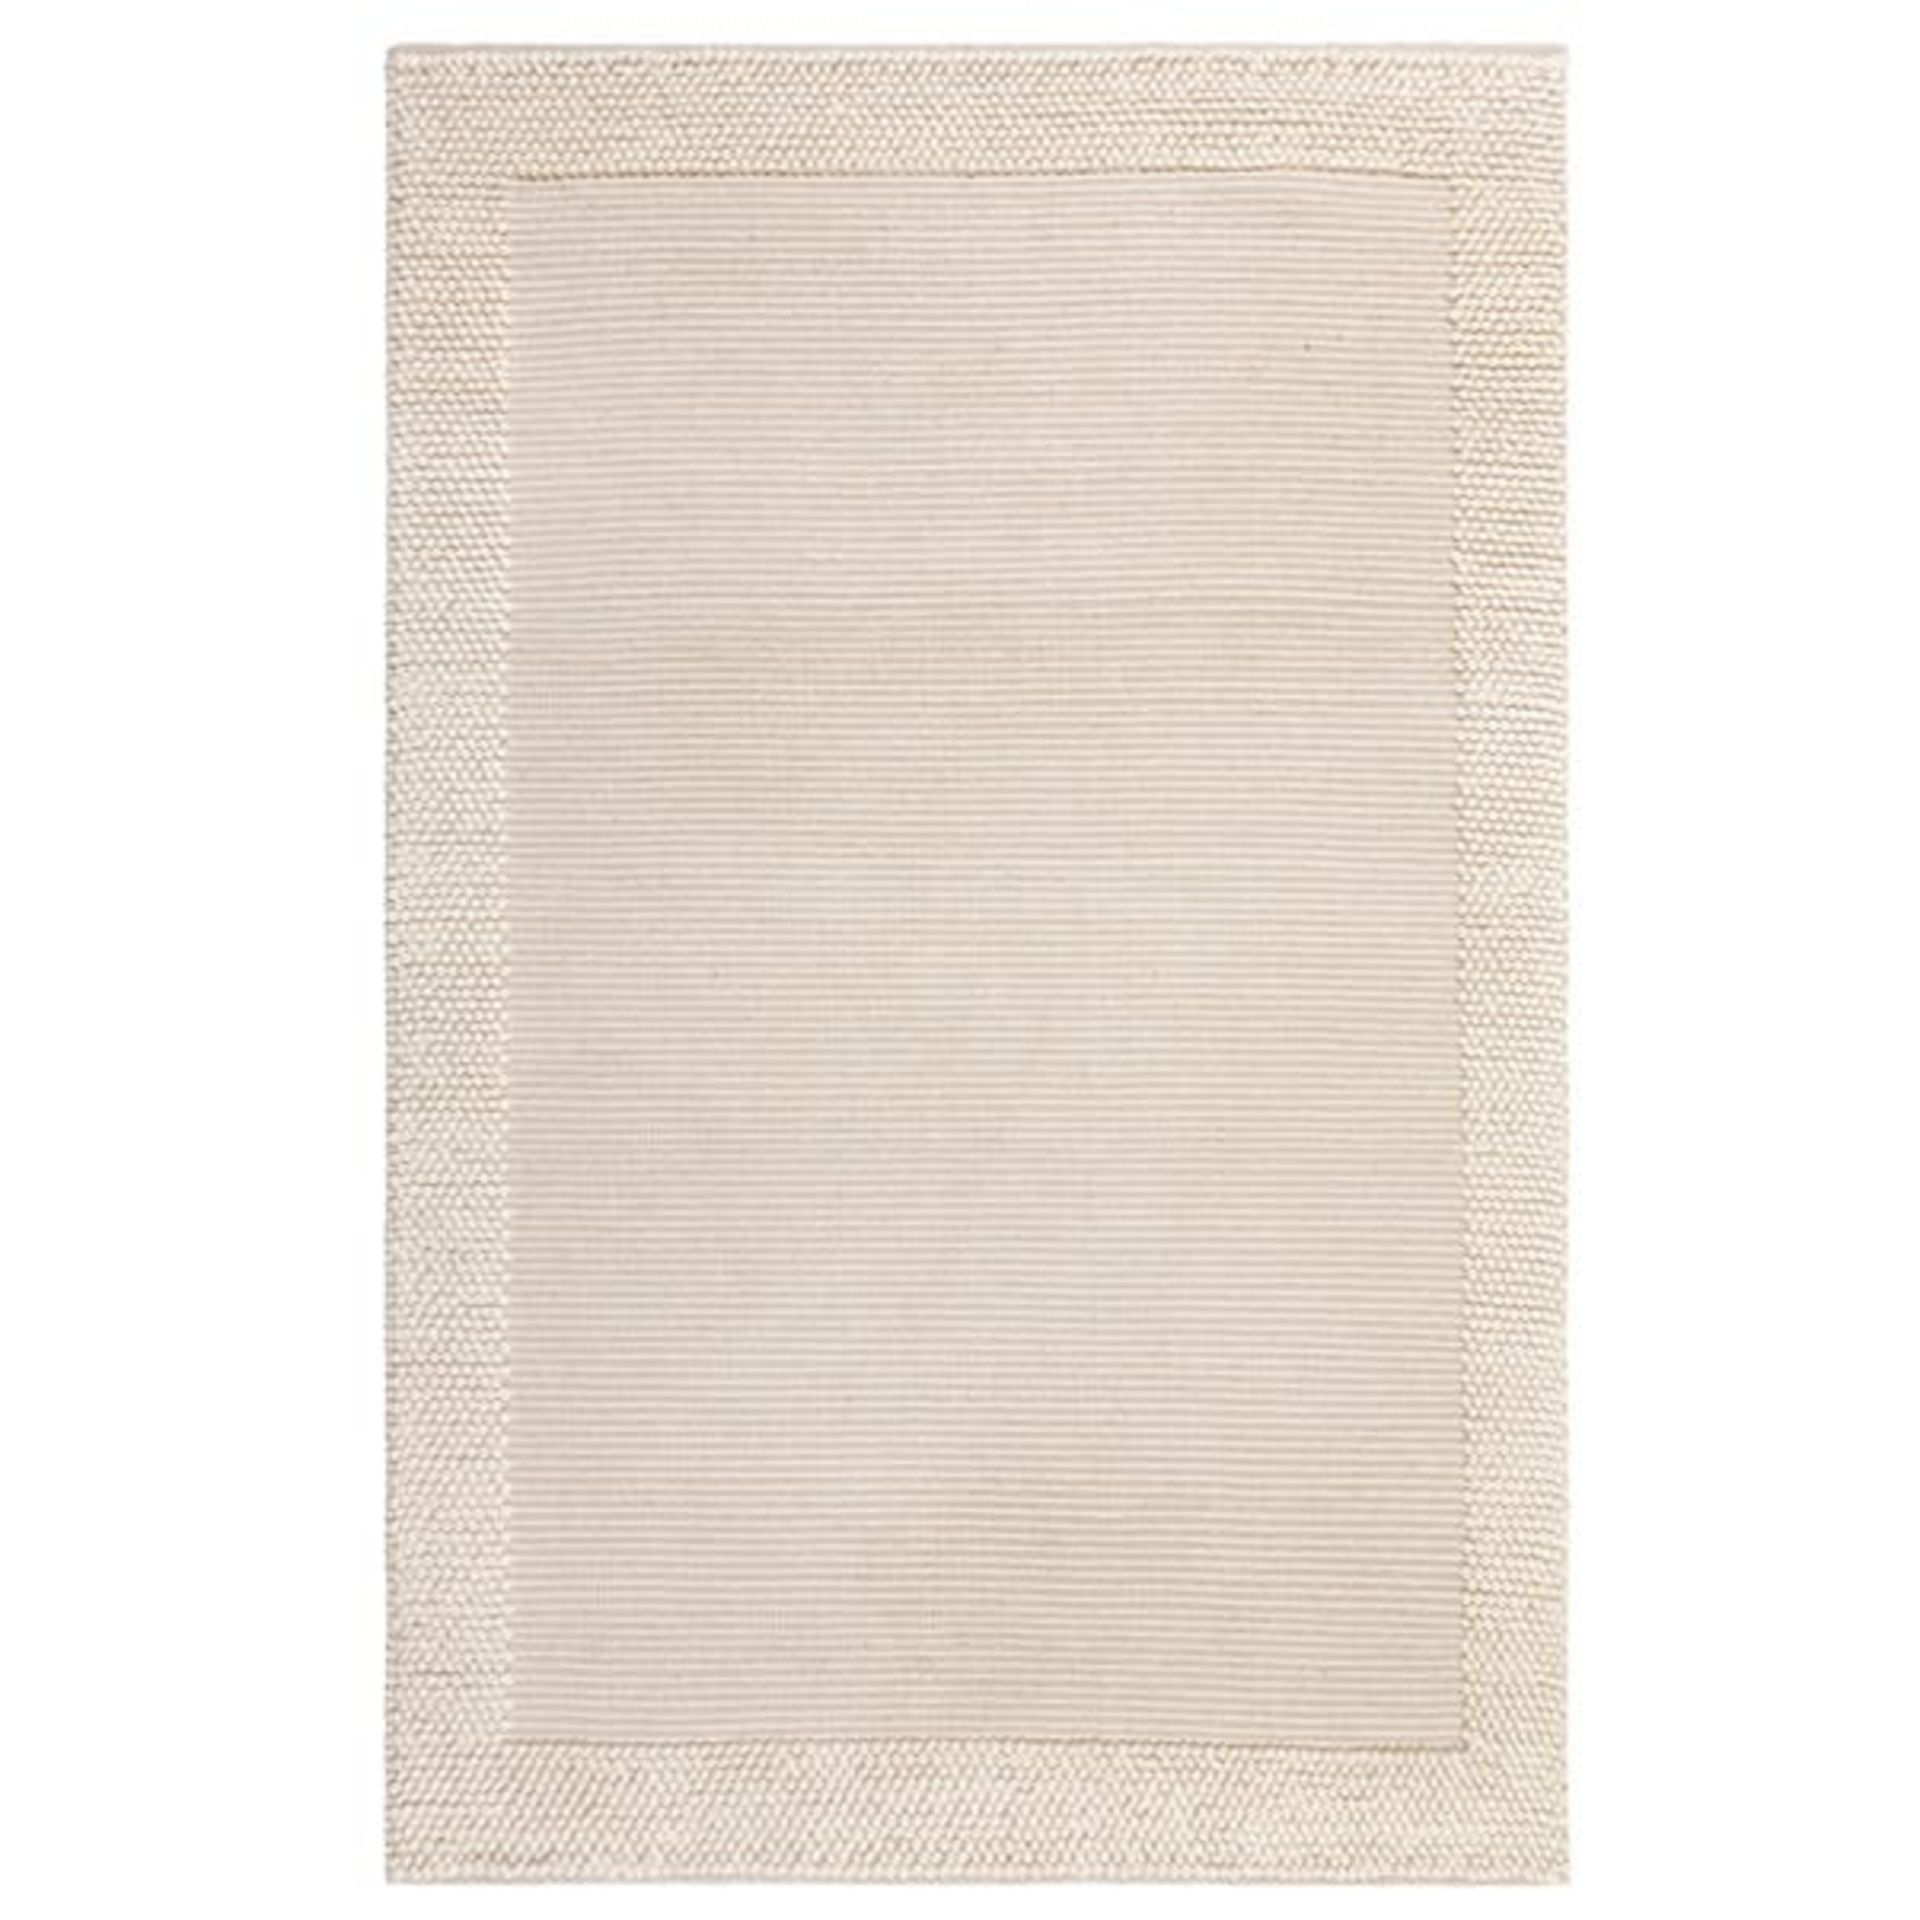 Pebble Wool Border Bobble Wool D040 Ivory Rectangle Rug 160X230cm RRP 169.00 About the Product(s) - Image 2 of 3